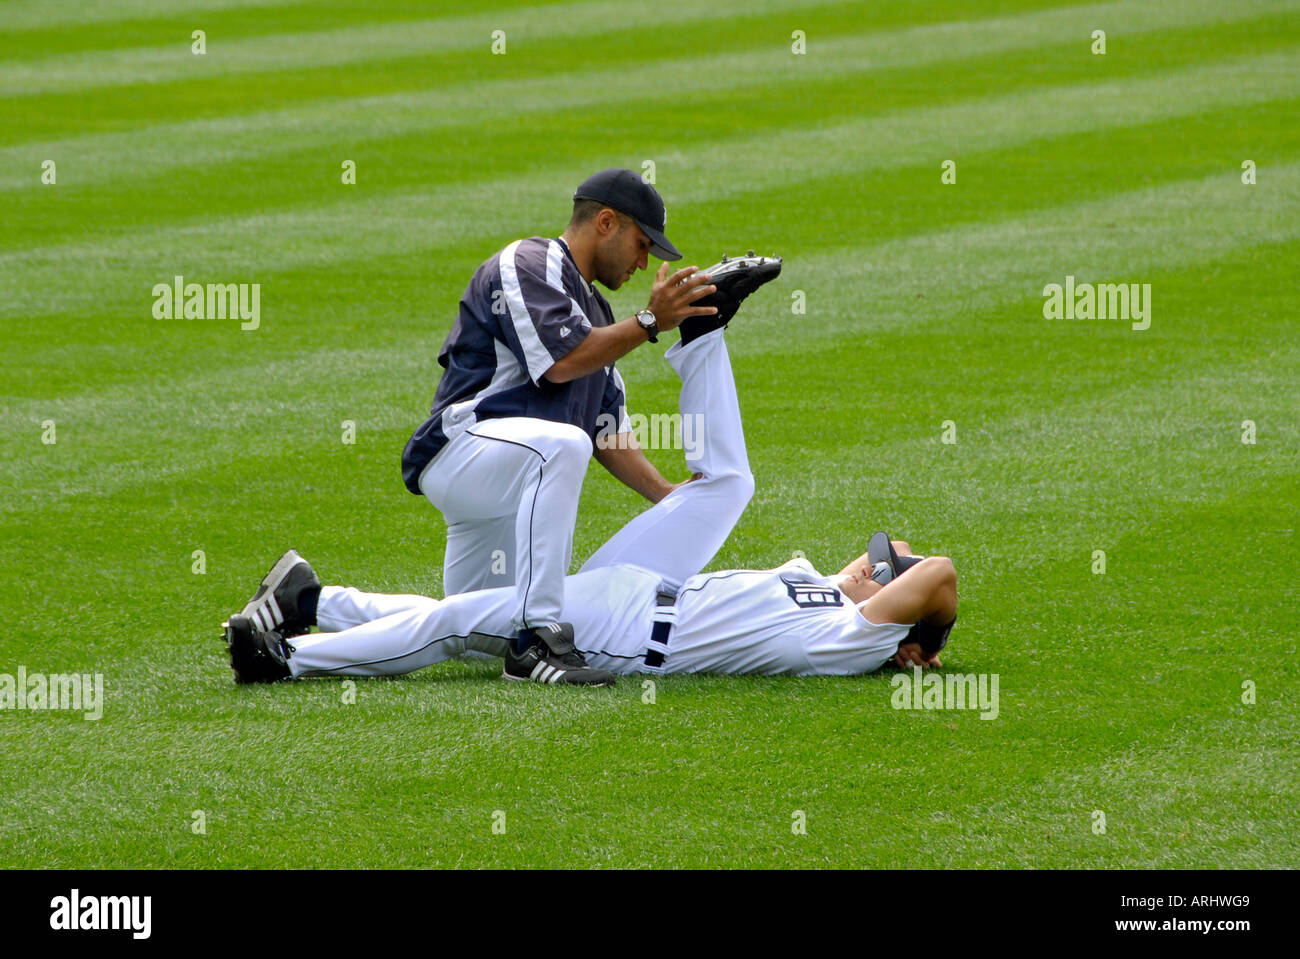 Warm up and stretching exercises prior to a Detroit Tiger Professional Baseball game at Comerica Park Detroit Michigan Stock Photo